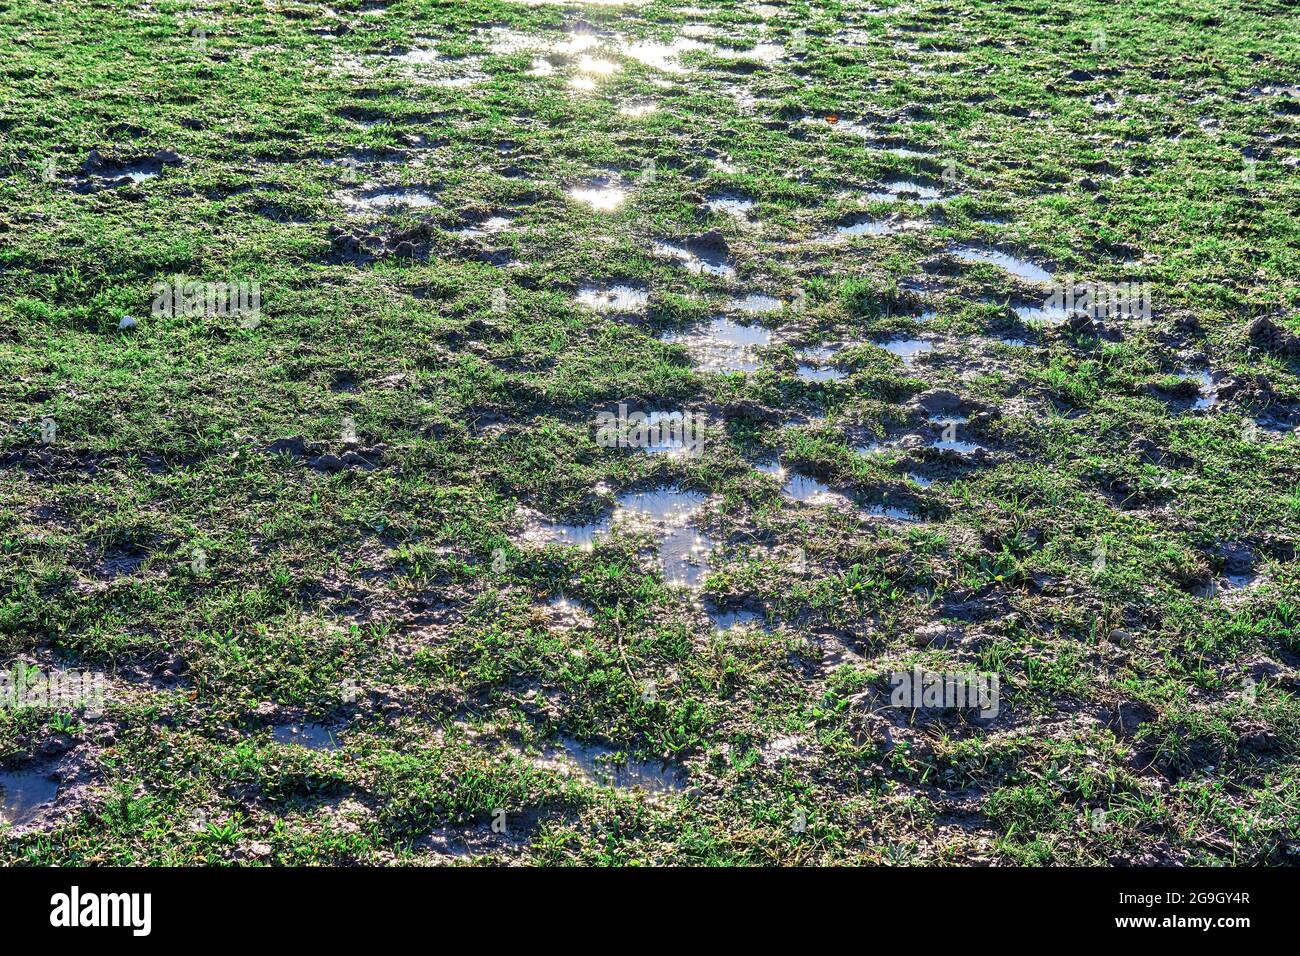 Grassy Marshland With Standing Water. swamp in forest area. Meadow, horizontal Stock Photo